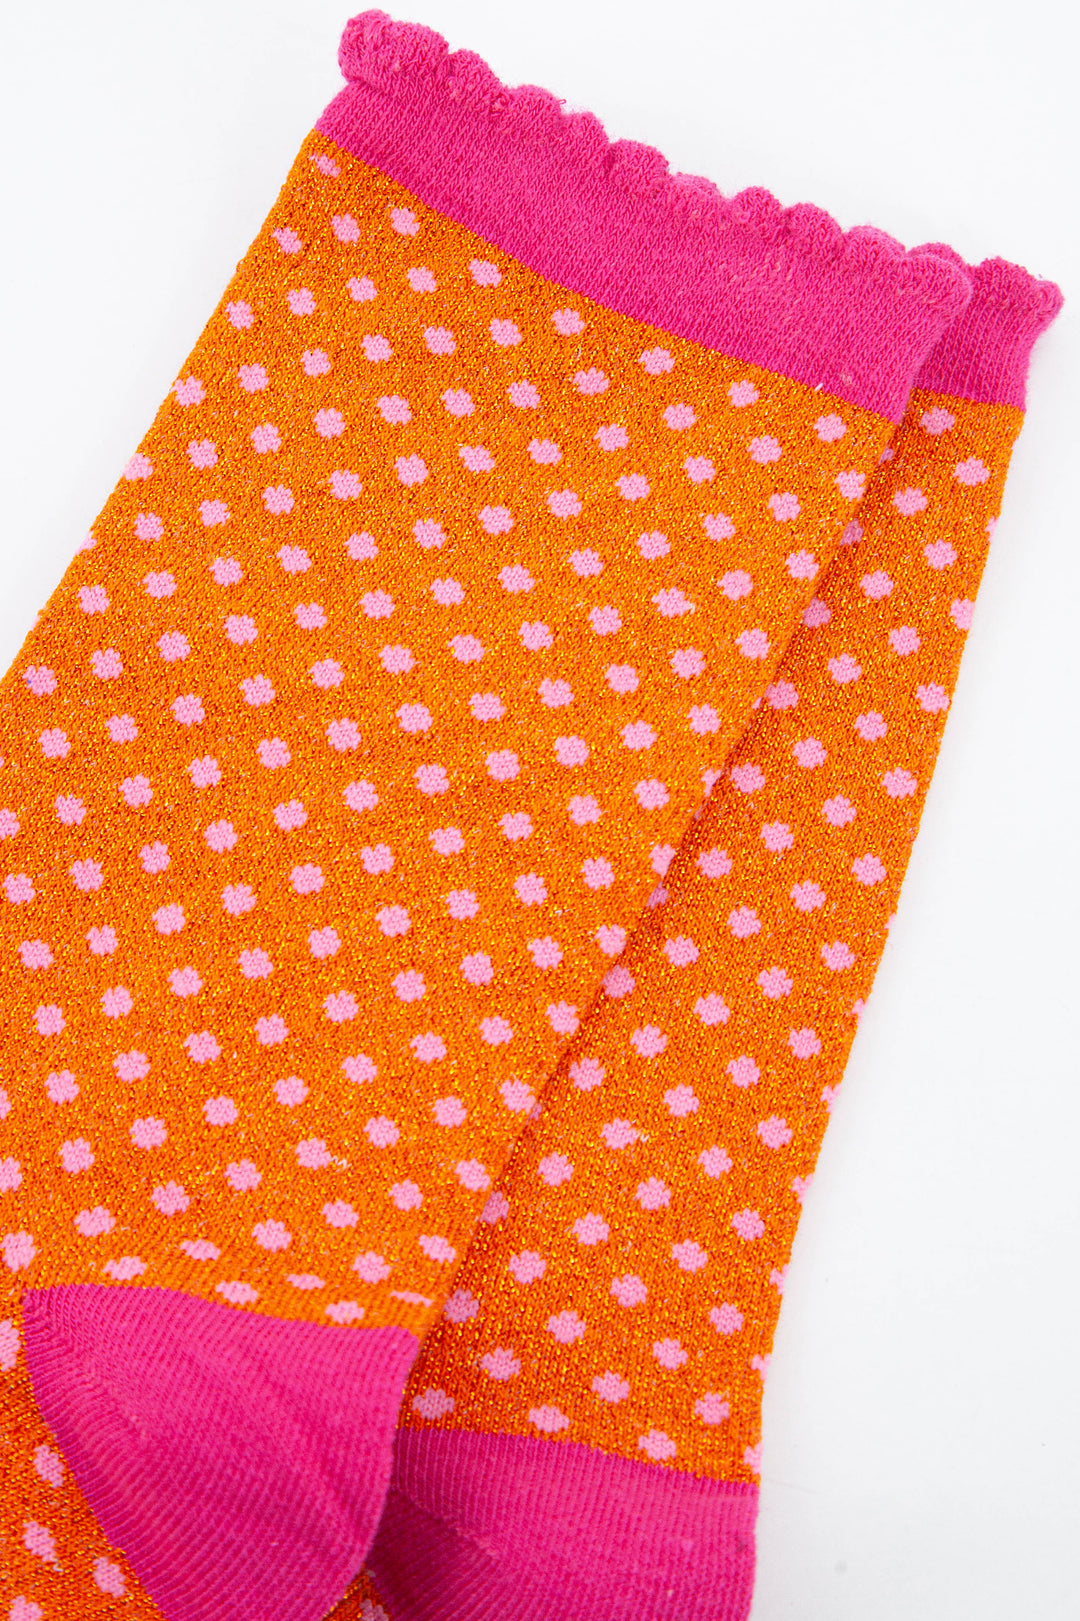 close up of the sparkly pink and orange material of the ankle socks